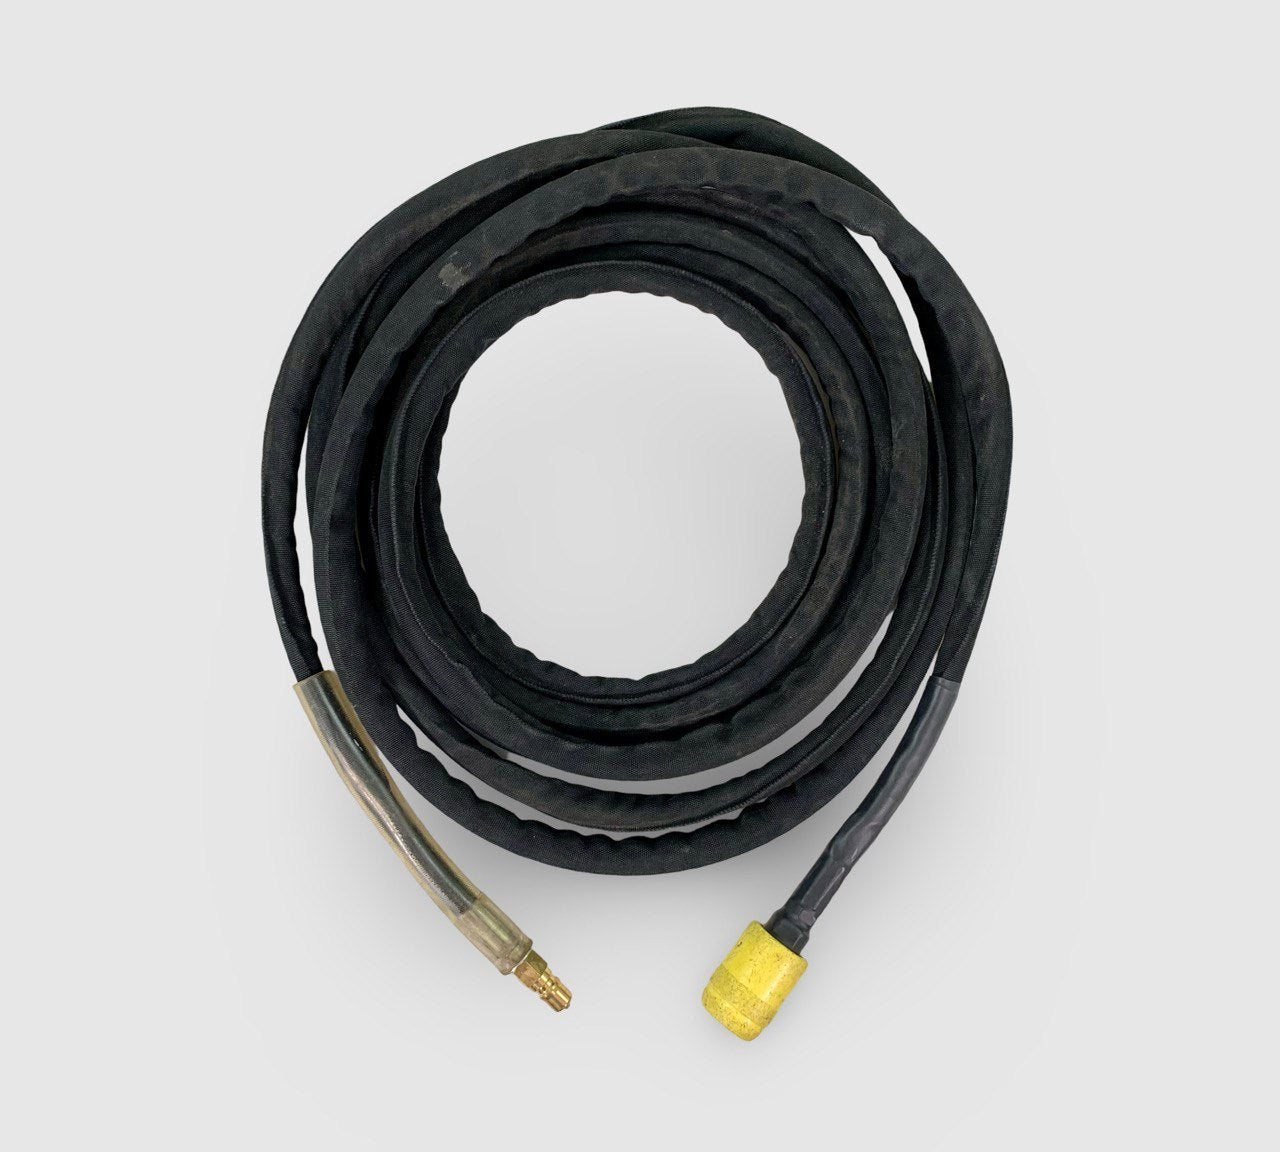 PRE-OWNED 25ft / 7.6m V2 Fully Sleeved Solution Hose ONLY - fitted with Standard Male & V2 Female Connector